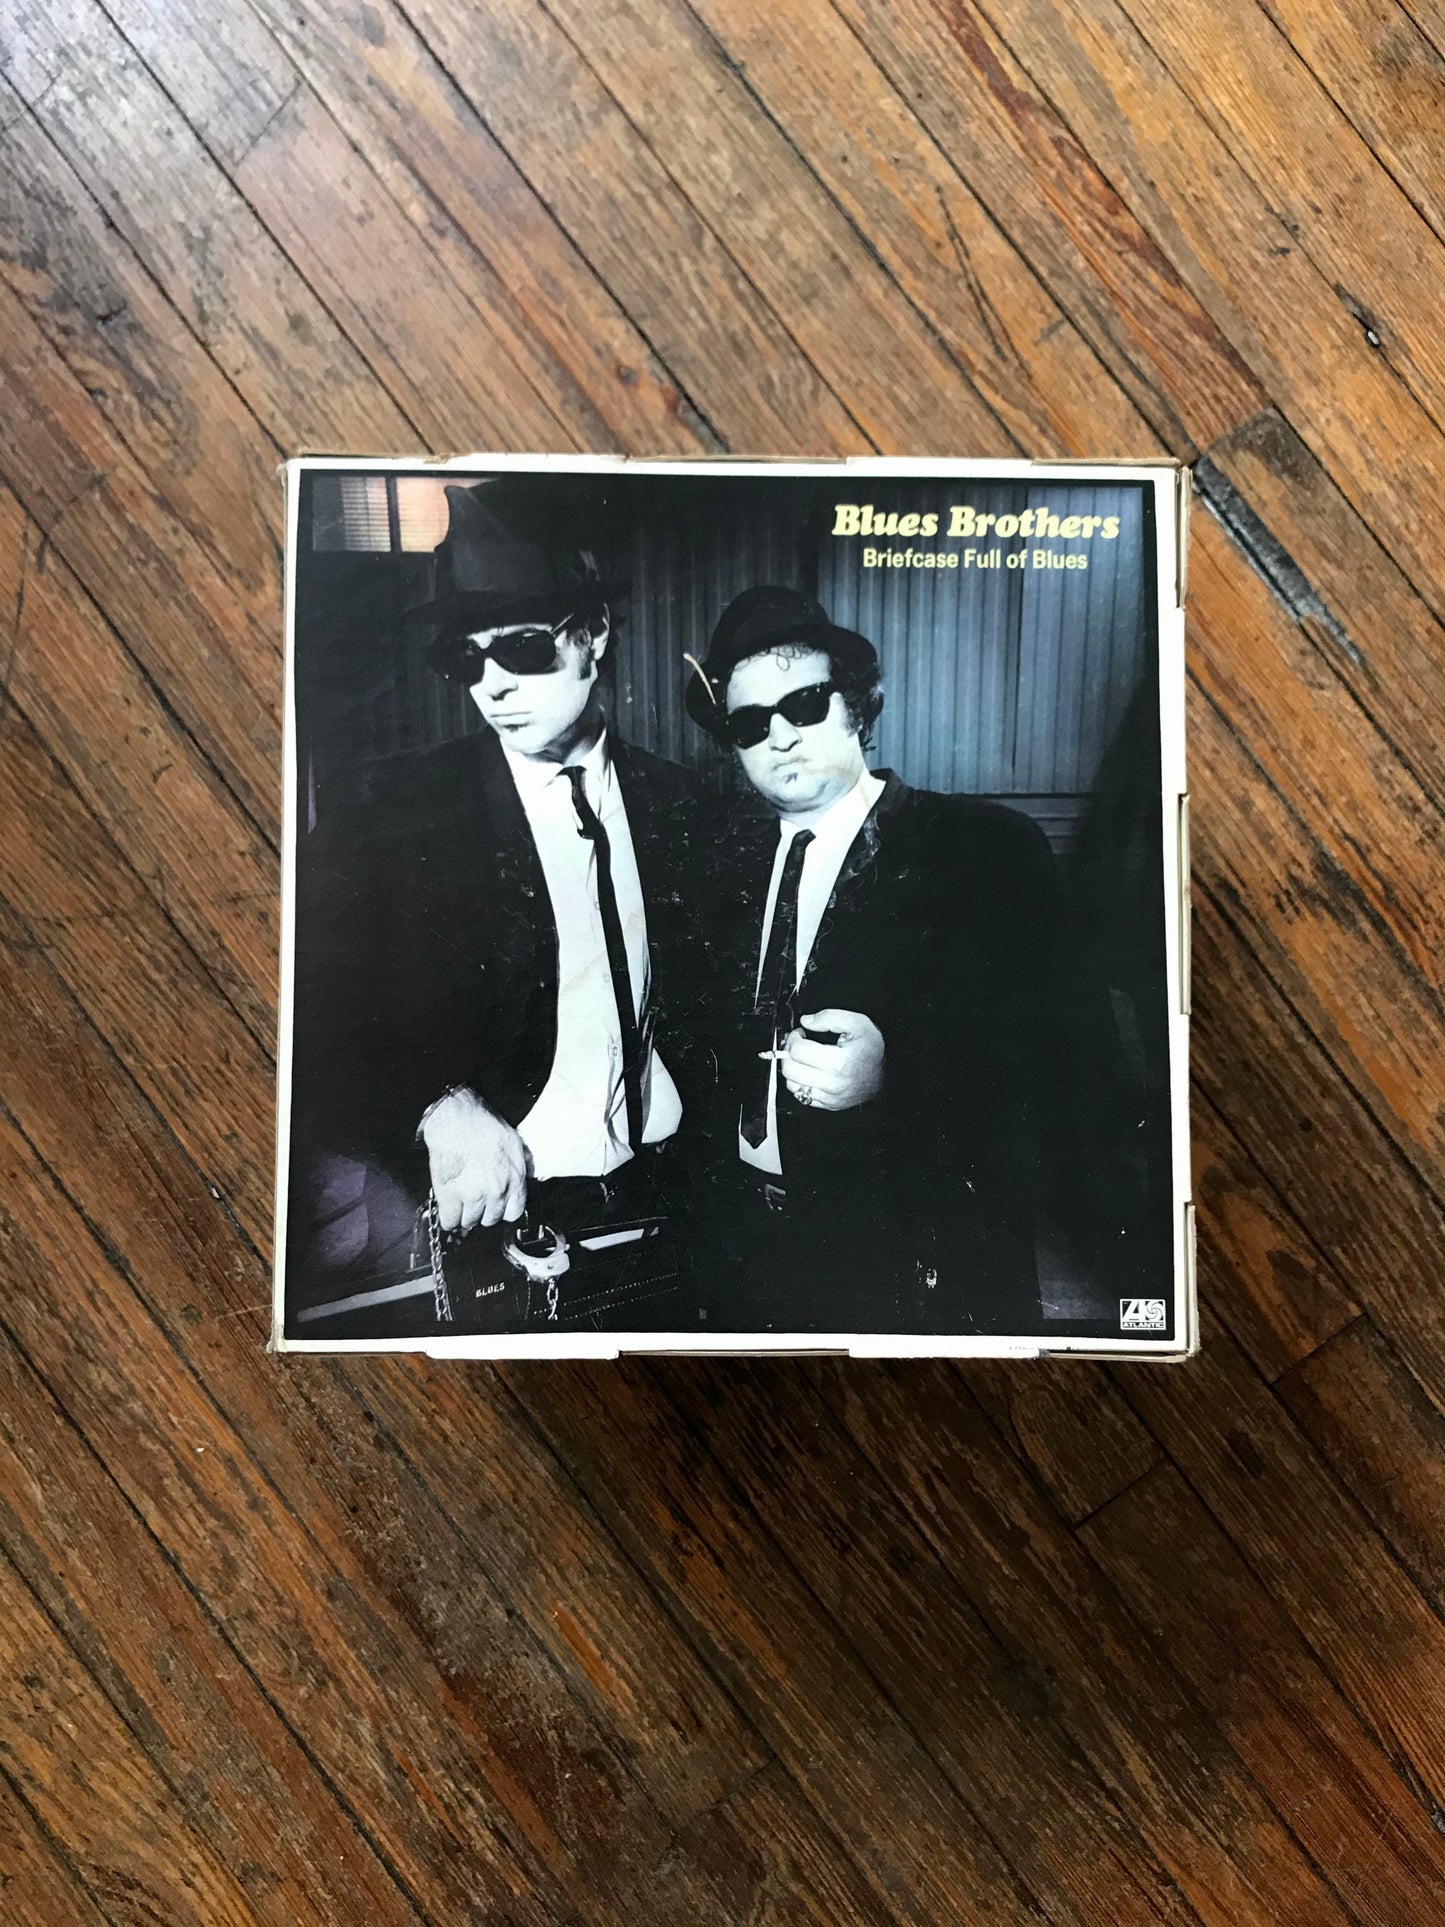 Rare 1978 Blues Brothers Briefcase Full of Blues Promo Box